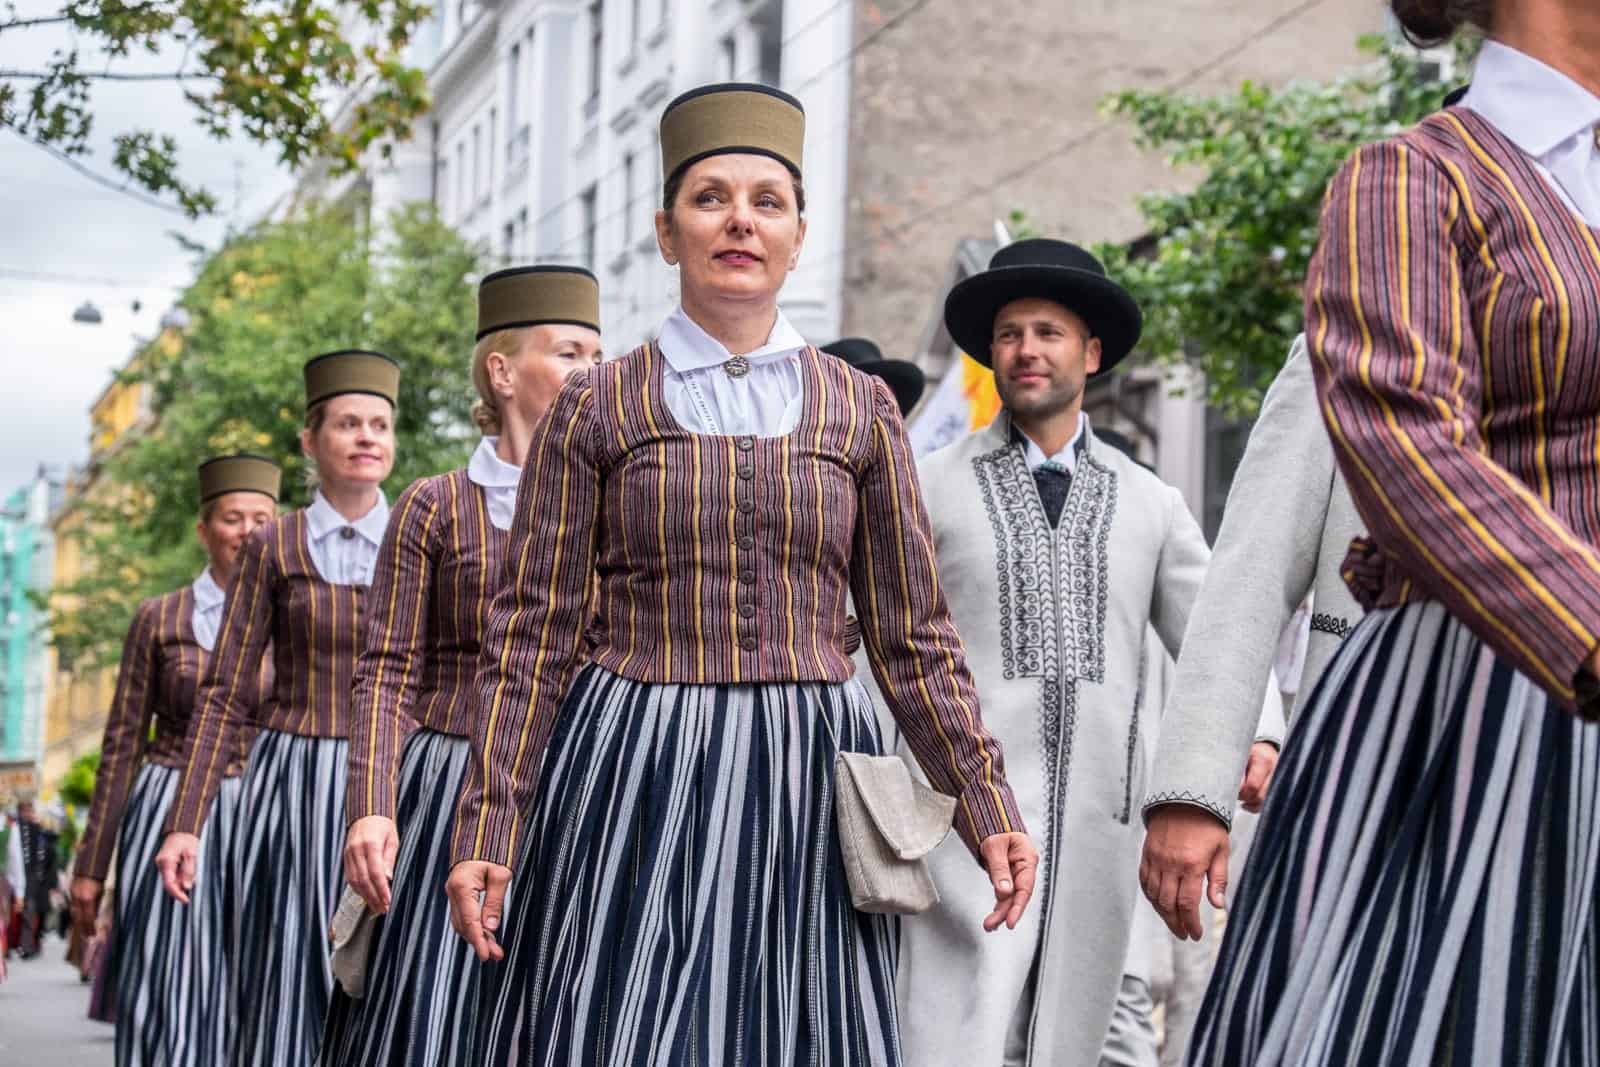 People performing in the Latvia Song and Dance Celebration street parade in Riga 